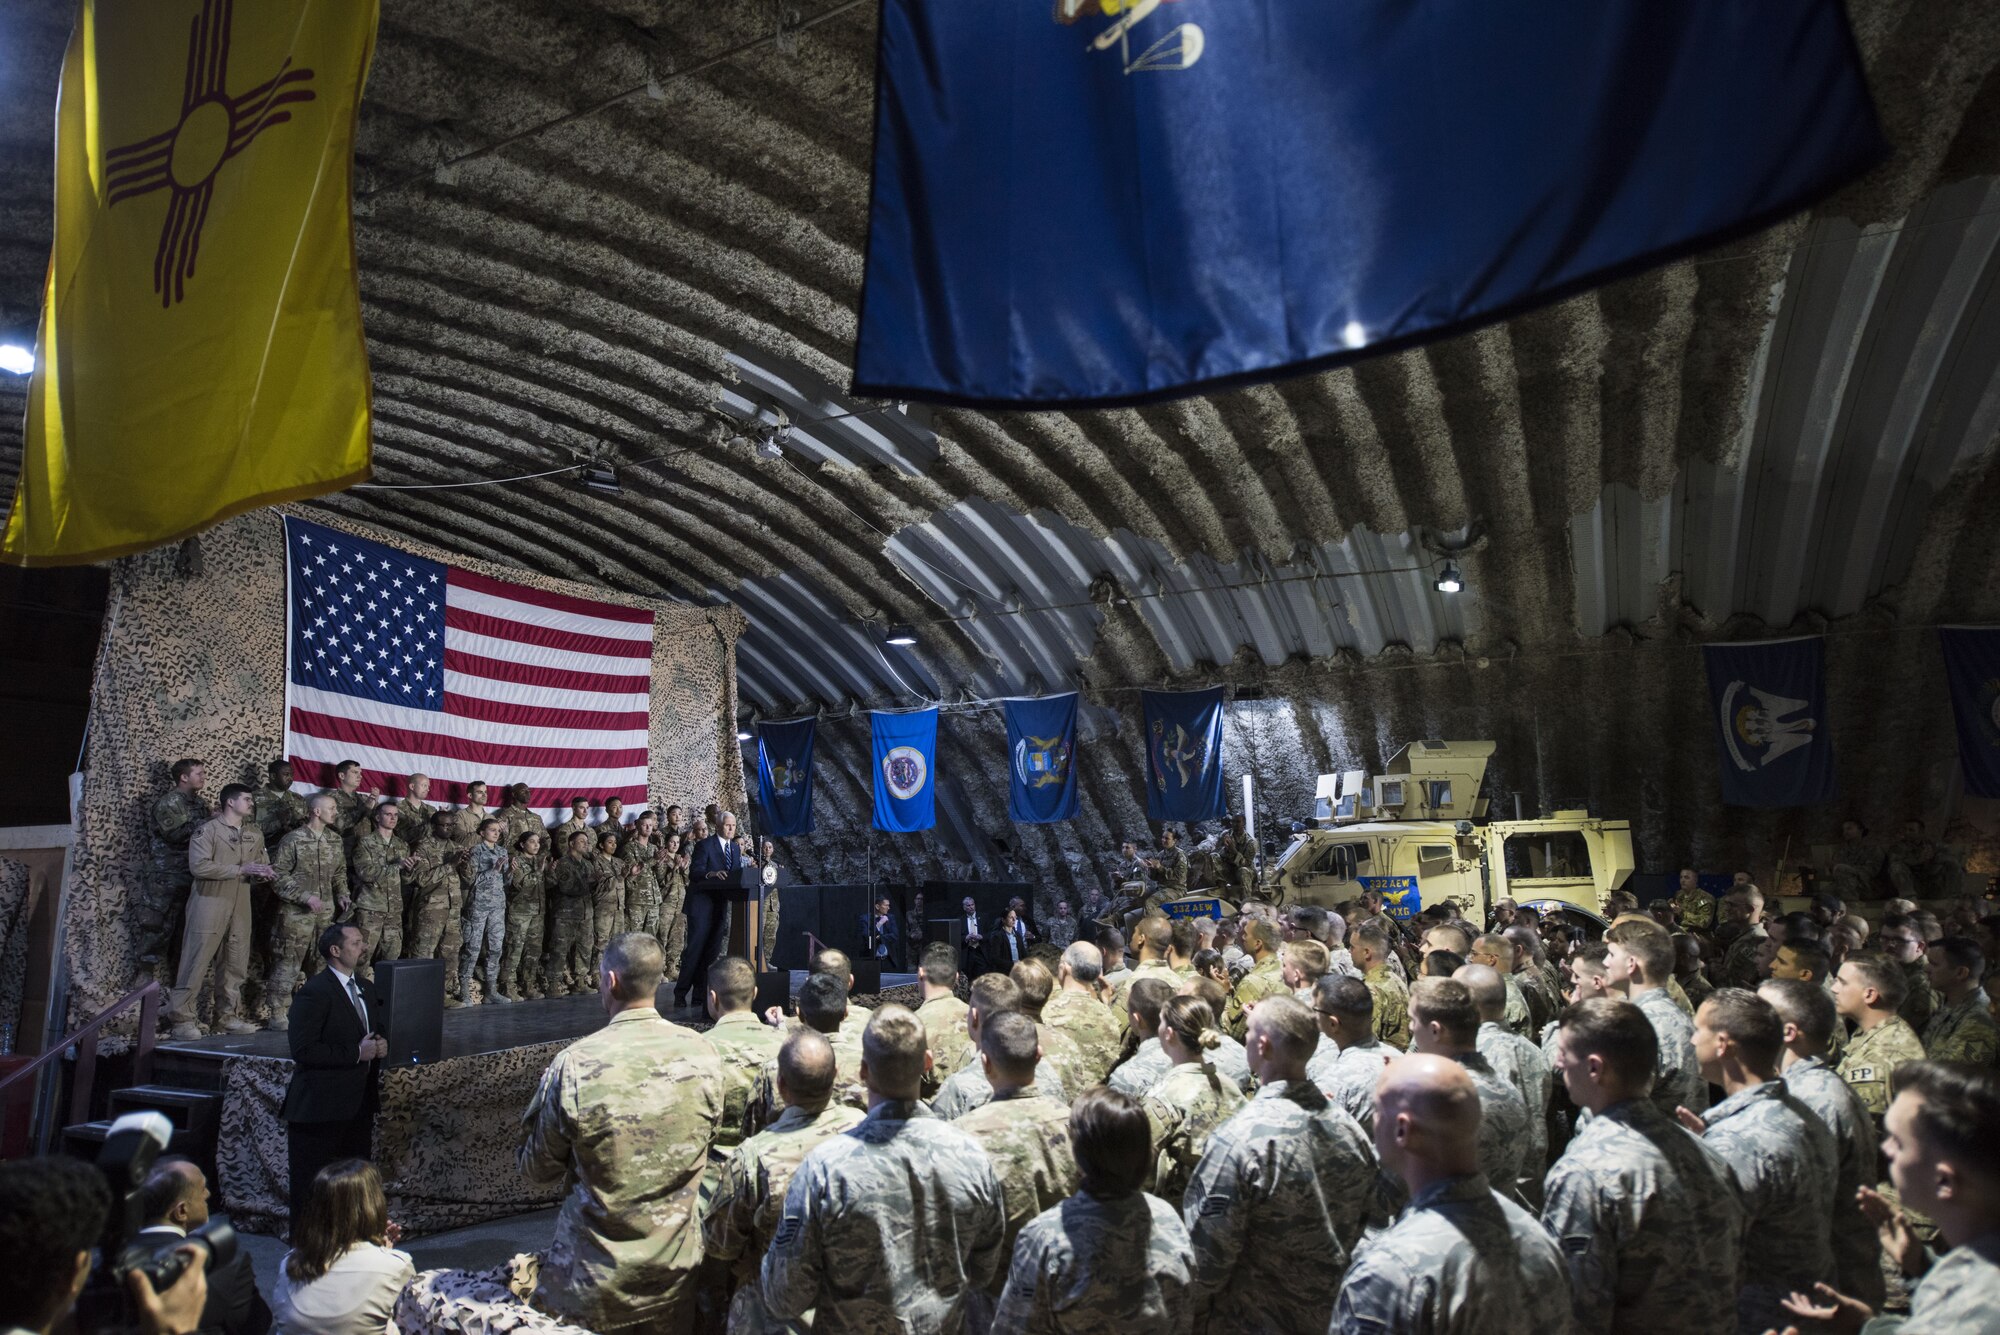 U.S. Vice President Mike Pence speaks to a crowd of deployed service members assigned to the 332d Air Expeditionary Wing January 21, 2018 at an undisclosed location in Southwest Asia. During his speech, Pence praised the wing’s continued dedication to the production of unrivaled airpower and reaffirmed the administration’s efforts to end the current government shutdown. (U.S. Air Force photo by Staff Sgt. Joshua Kleinholz)